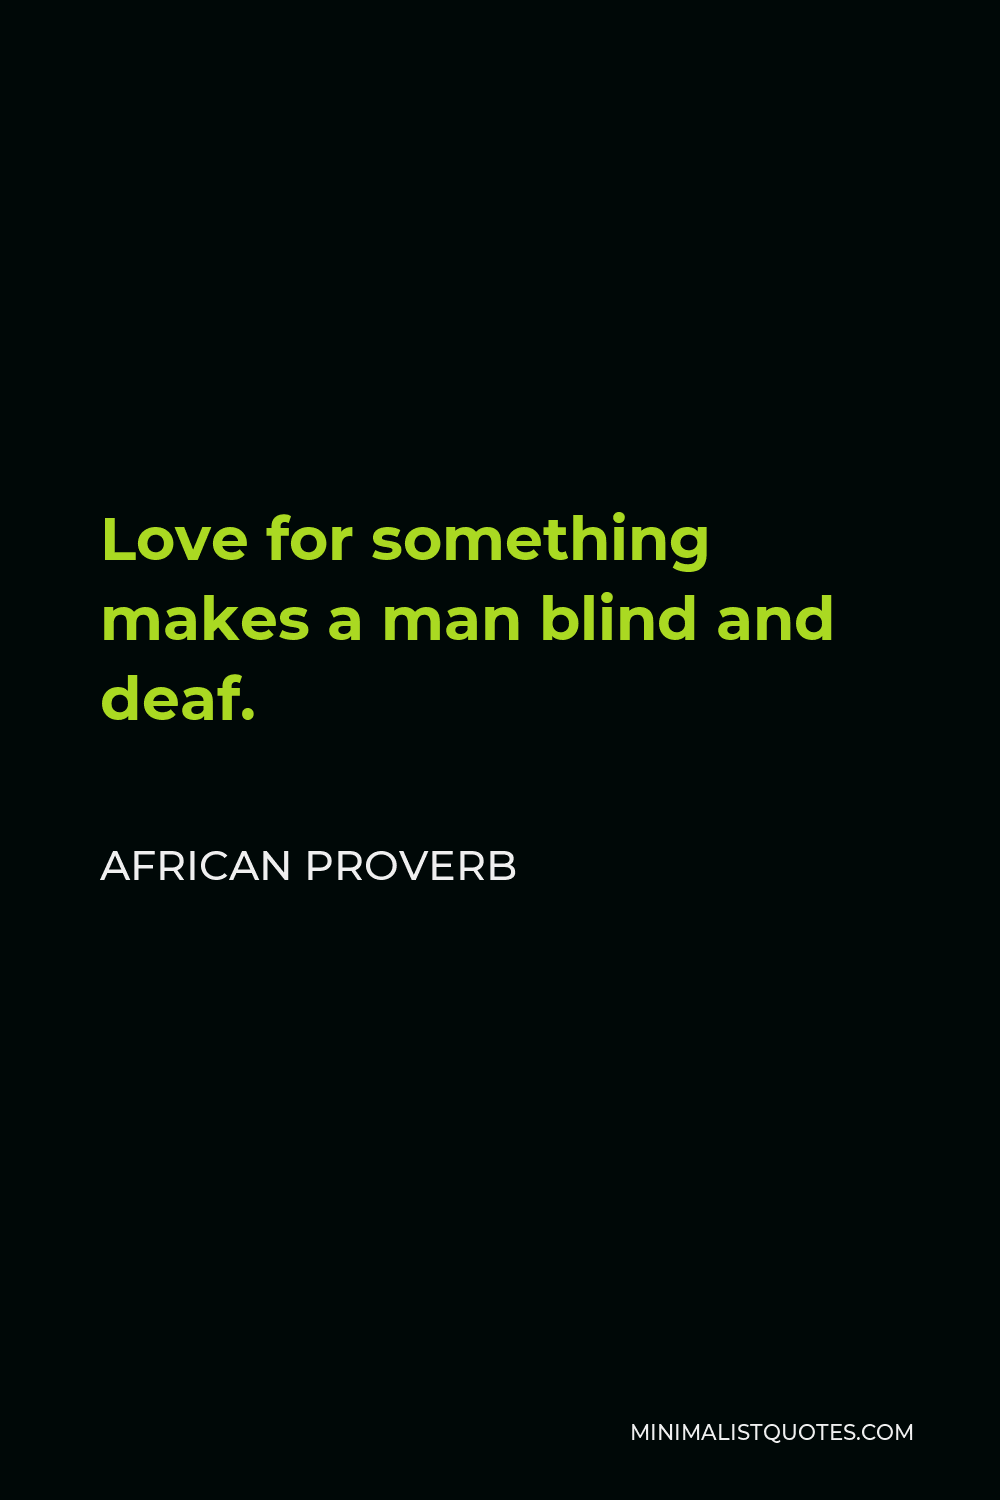 African Proverb Quote - Love for something makes a man blind and deaf.